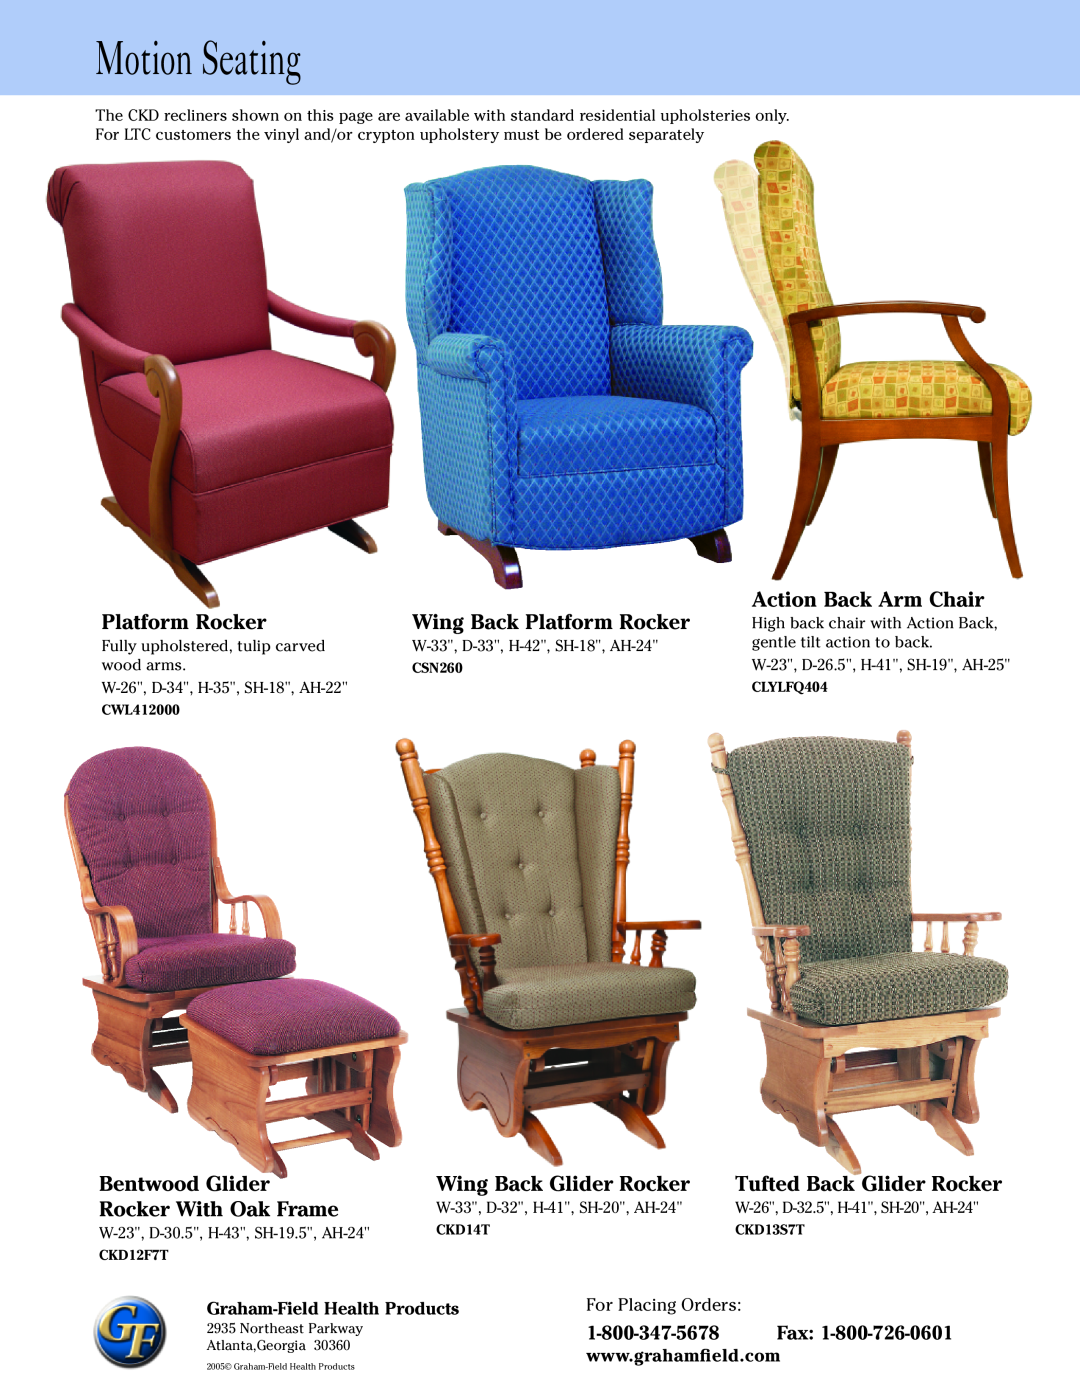 Graham Field CLYLFQ404 manual Motion Seating, Wing Back Platform Rocker, Action Back Arm Chair, Bentwood Glider 